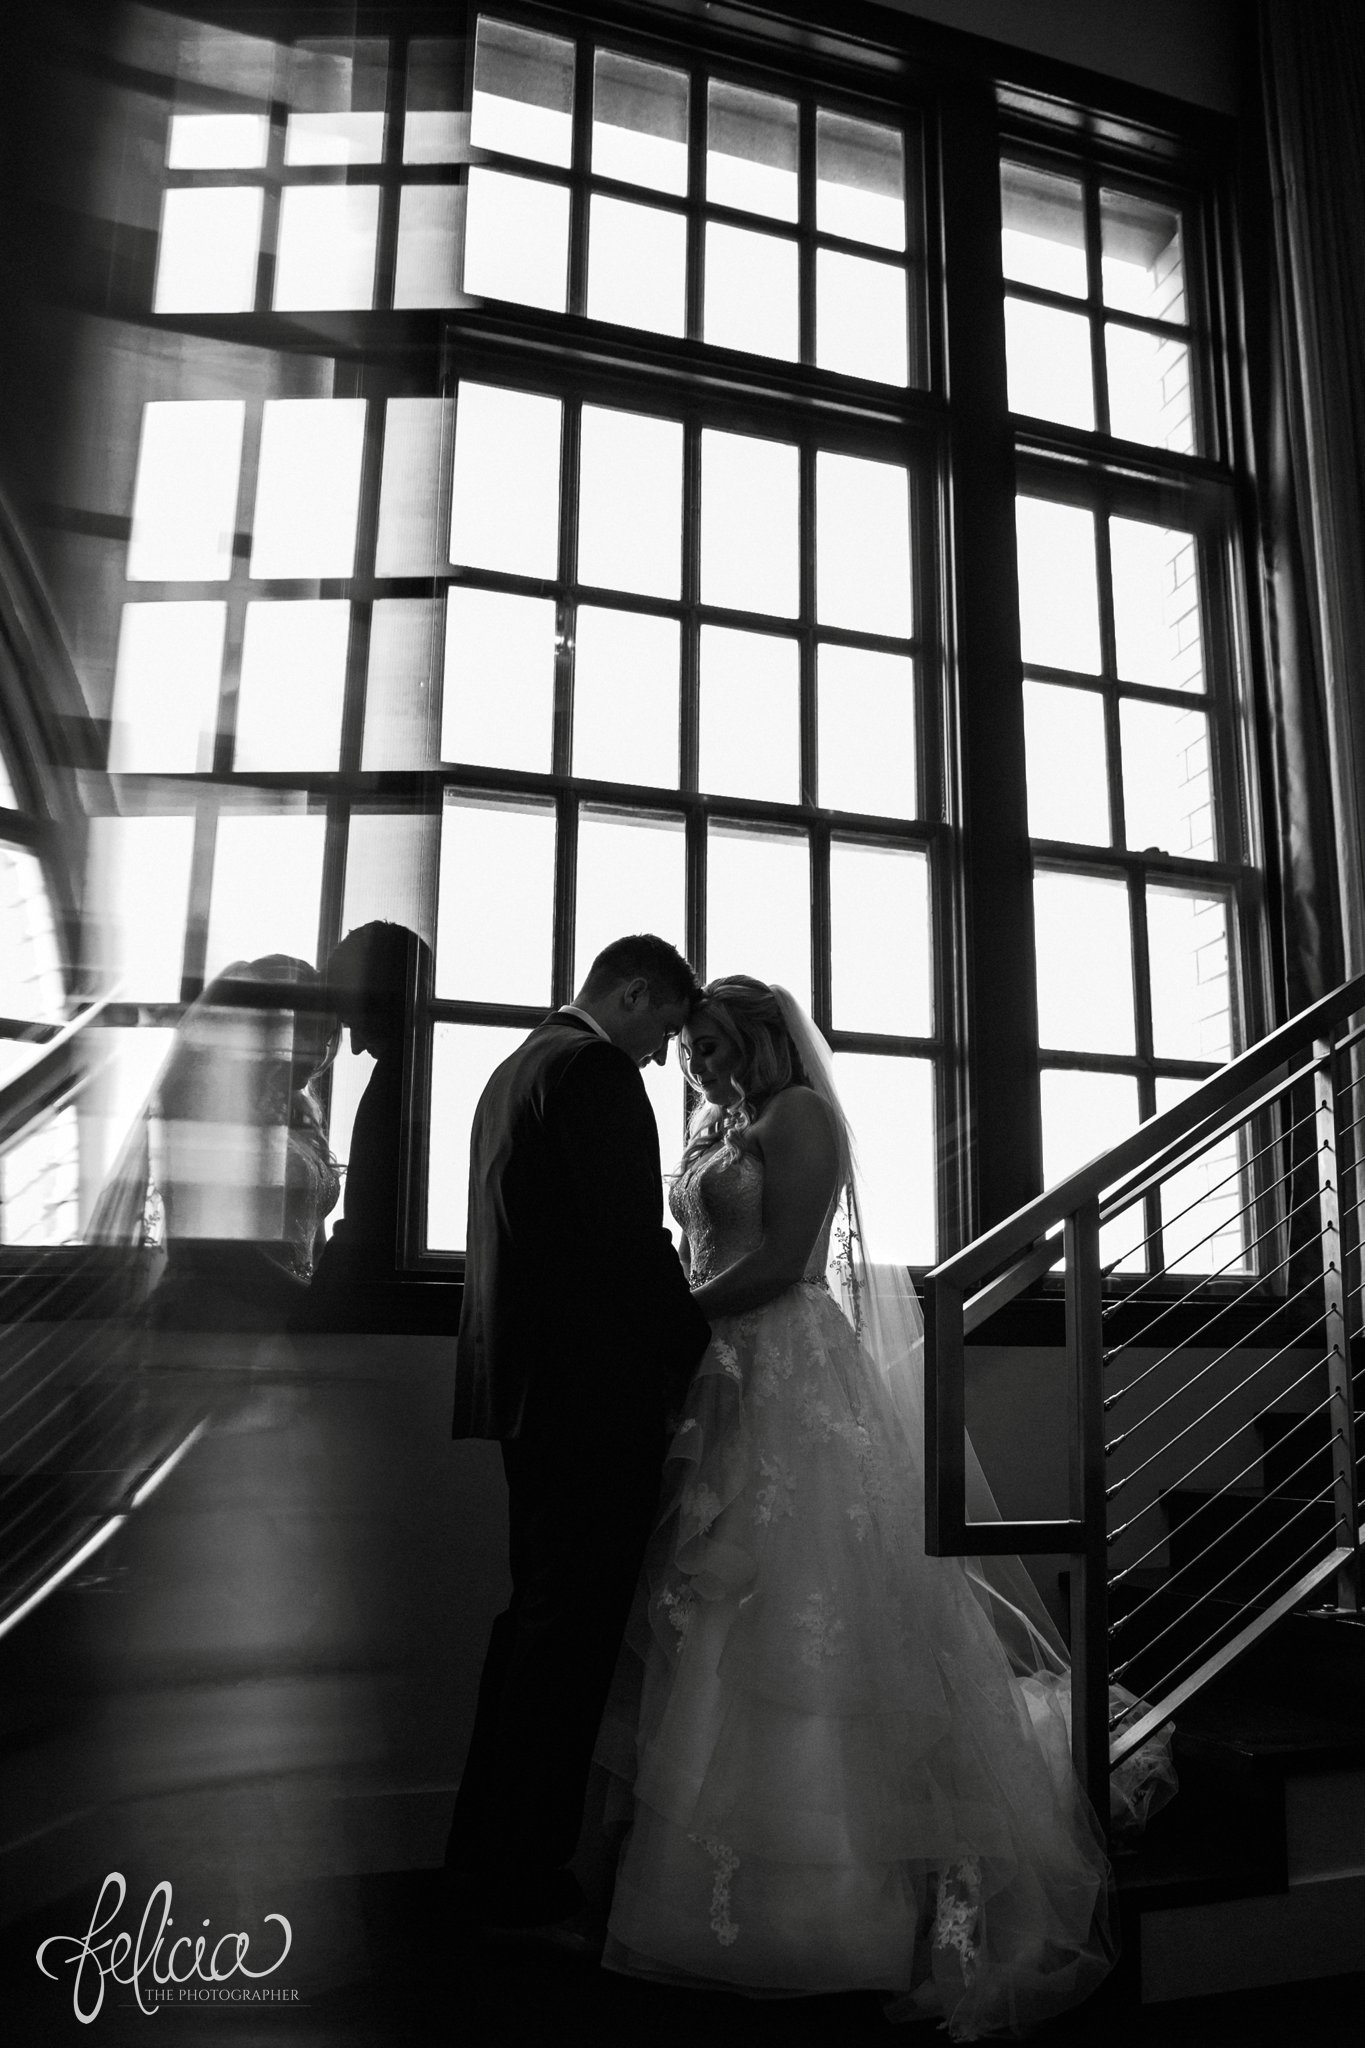 images by feliciathephotographer.com | wedding photographer | downtown kansas city | first look | hotel ambassador | natural lighting | romantic | belle vogue | mens warehouse | glamorous | intimate | black and white | reflection | abstract | artsy | 